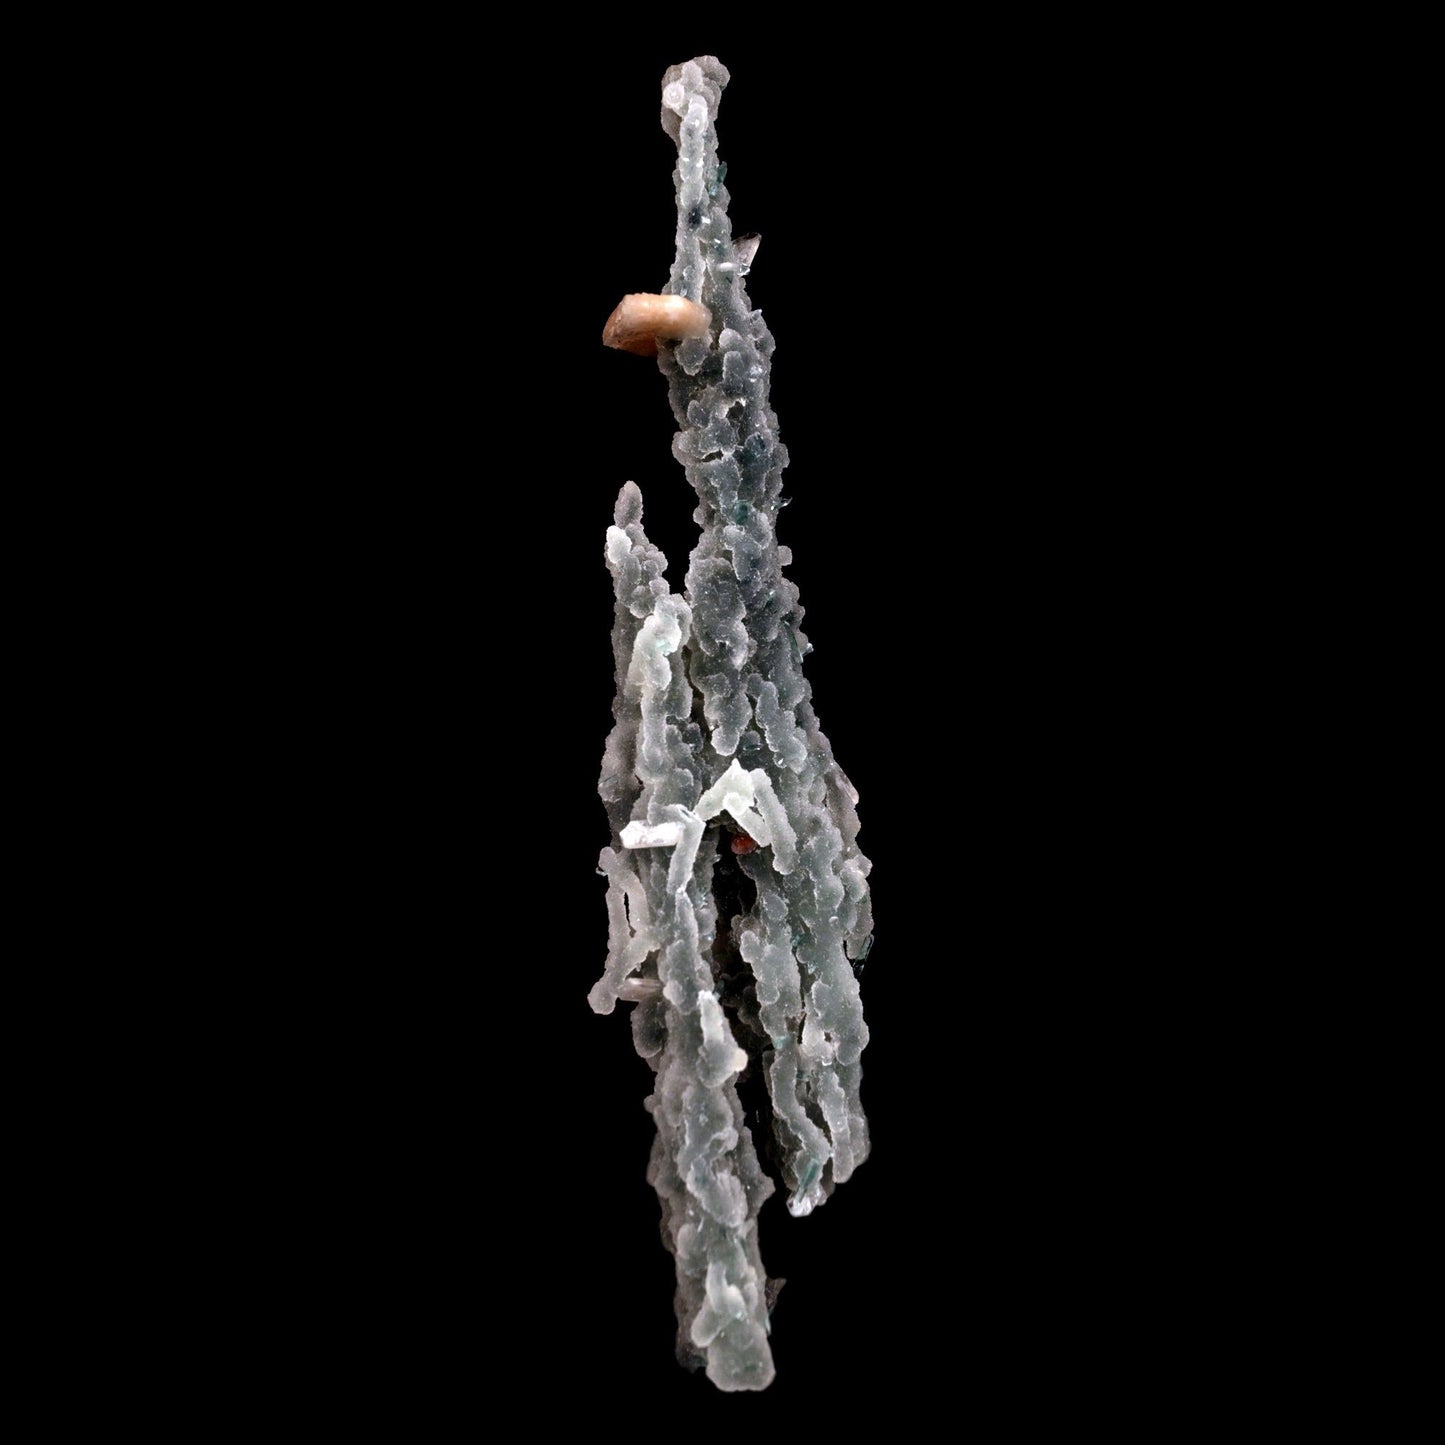 Stilbite on Chalcedony Stalactites Natural Mineral Specimen # B 4828  https://www.superbminerals.us/products/stilbite-on-chalcedony-stalactites-natural-mineral-specimen-b-4828  Features: Stalactites of drusy greenish-gray chalcedony dangle from a stunning corsage of iridescent, salmon-pink stilbite bowties. The matrix is highly sculptural.With only a few touched stalactite tips, this piece is essentially flawless and looks great from all angles!Outstanding huge Jalgaon combo 